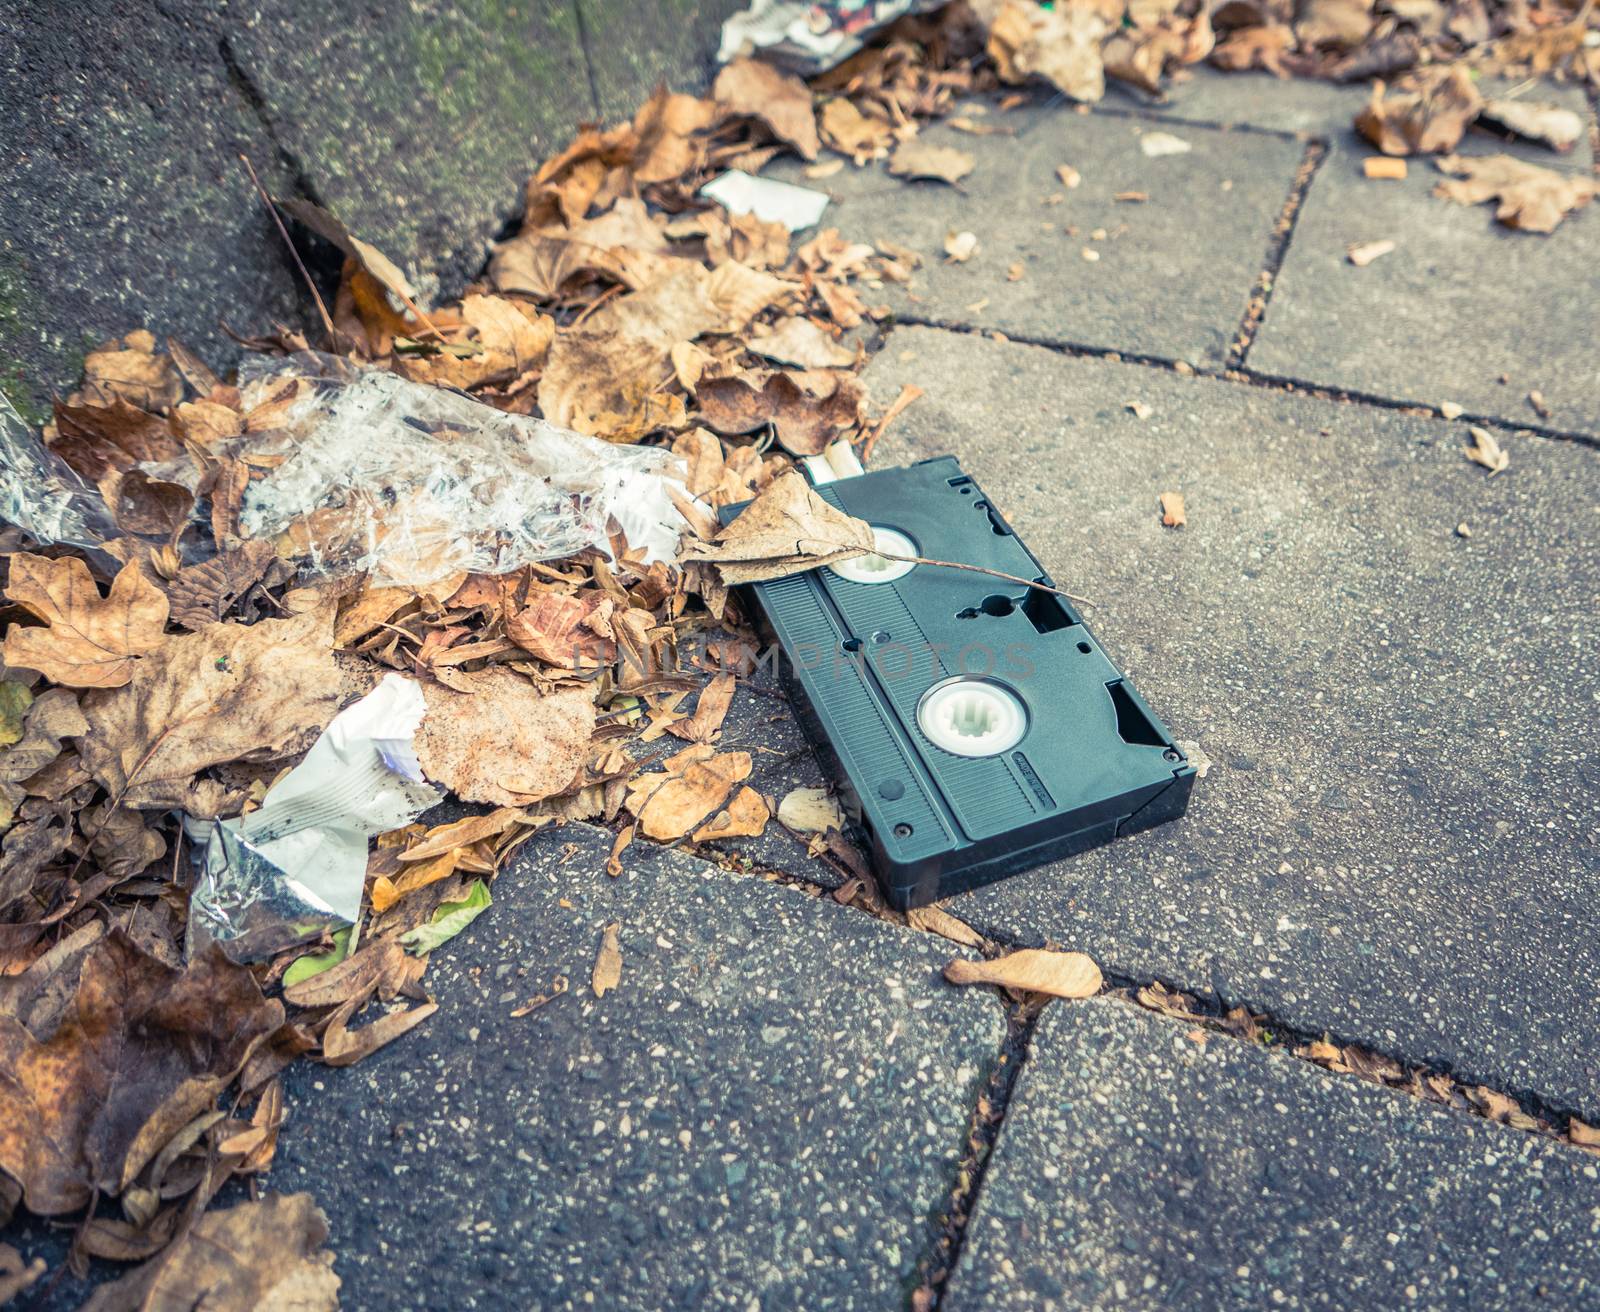 Conceptual Image Of An Abandoned VHS Tape In The Street